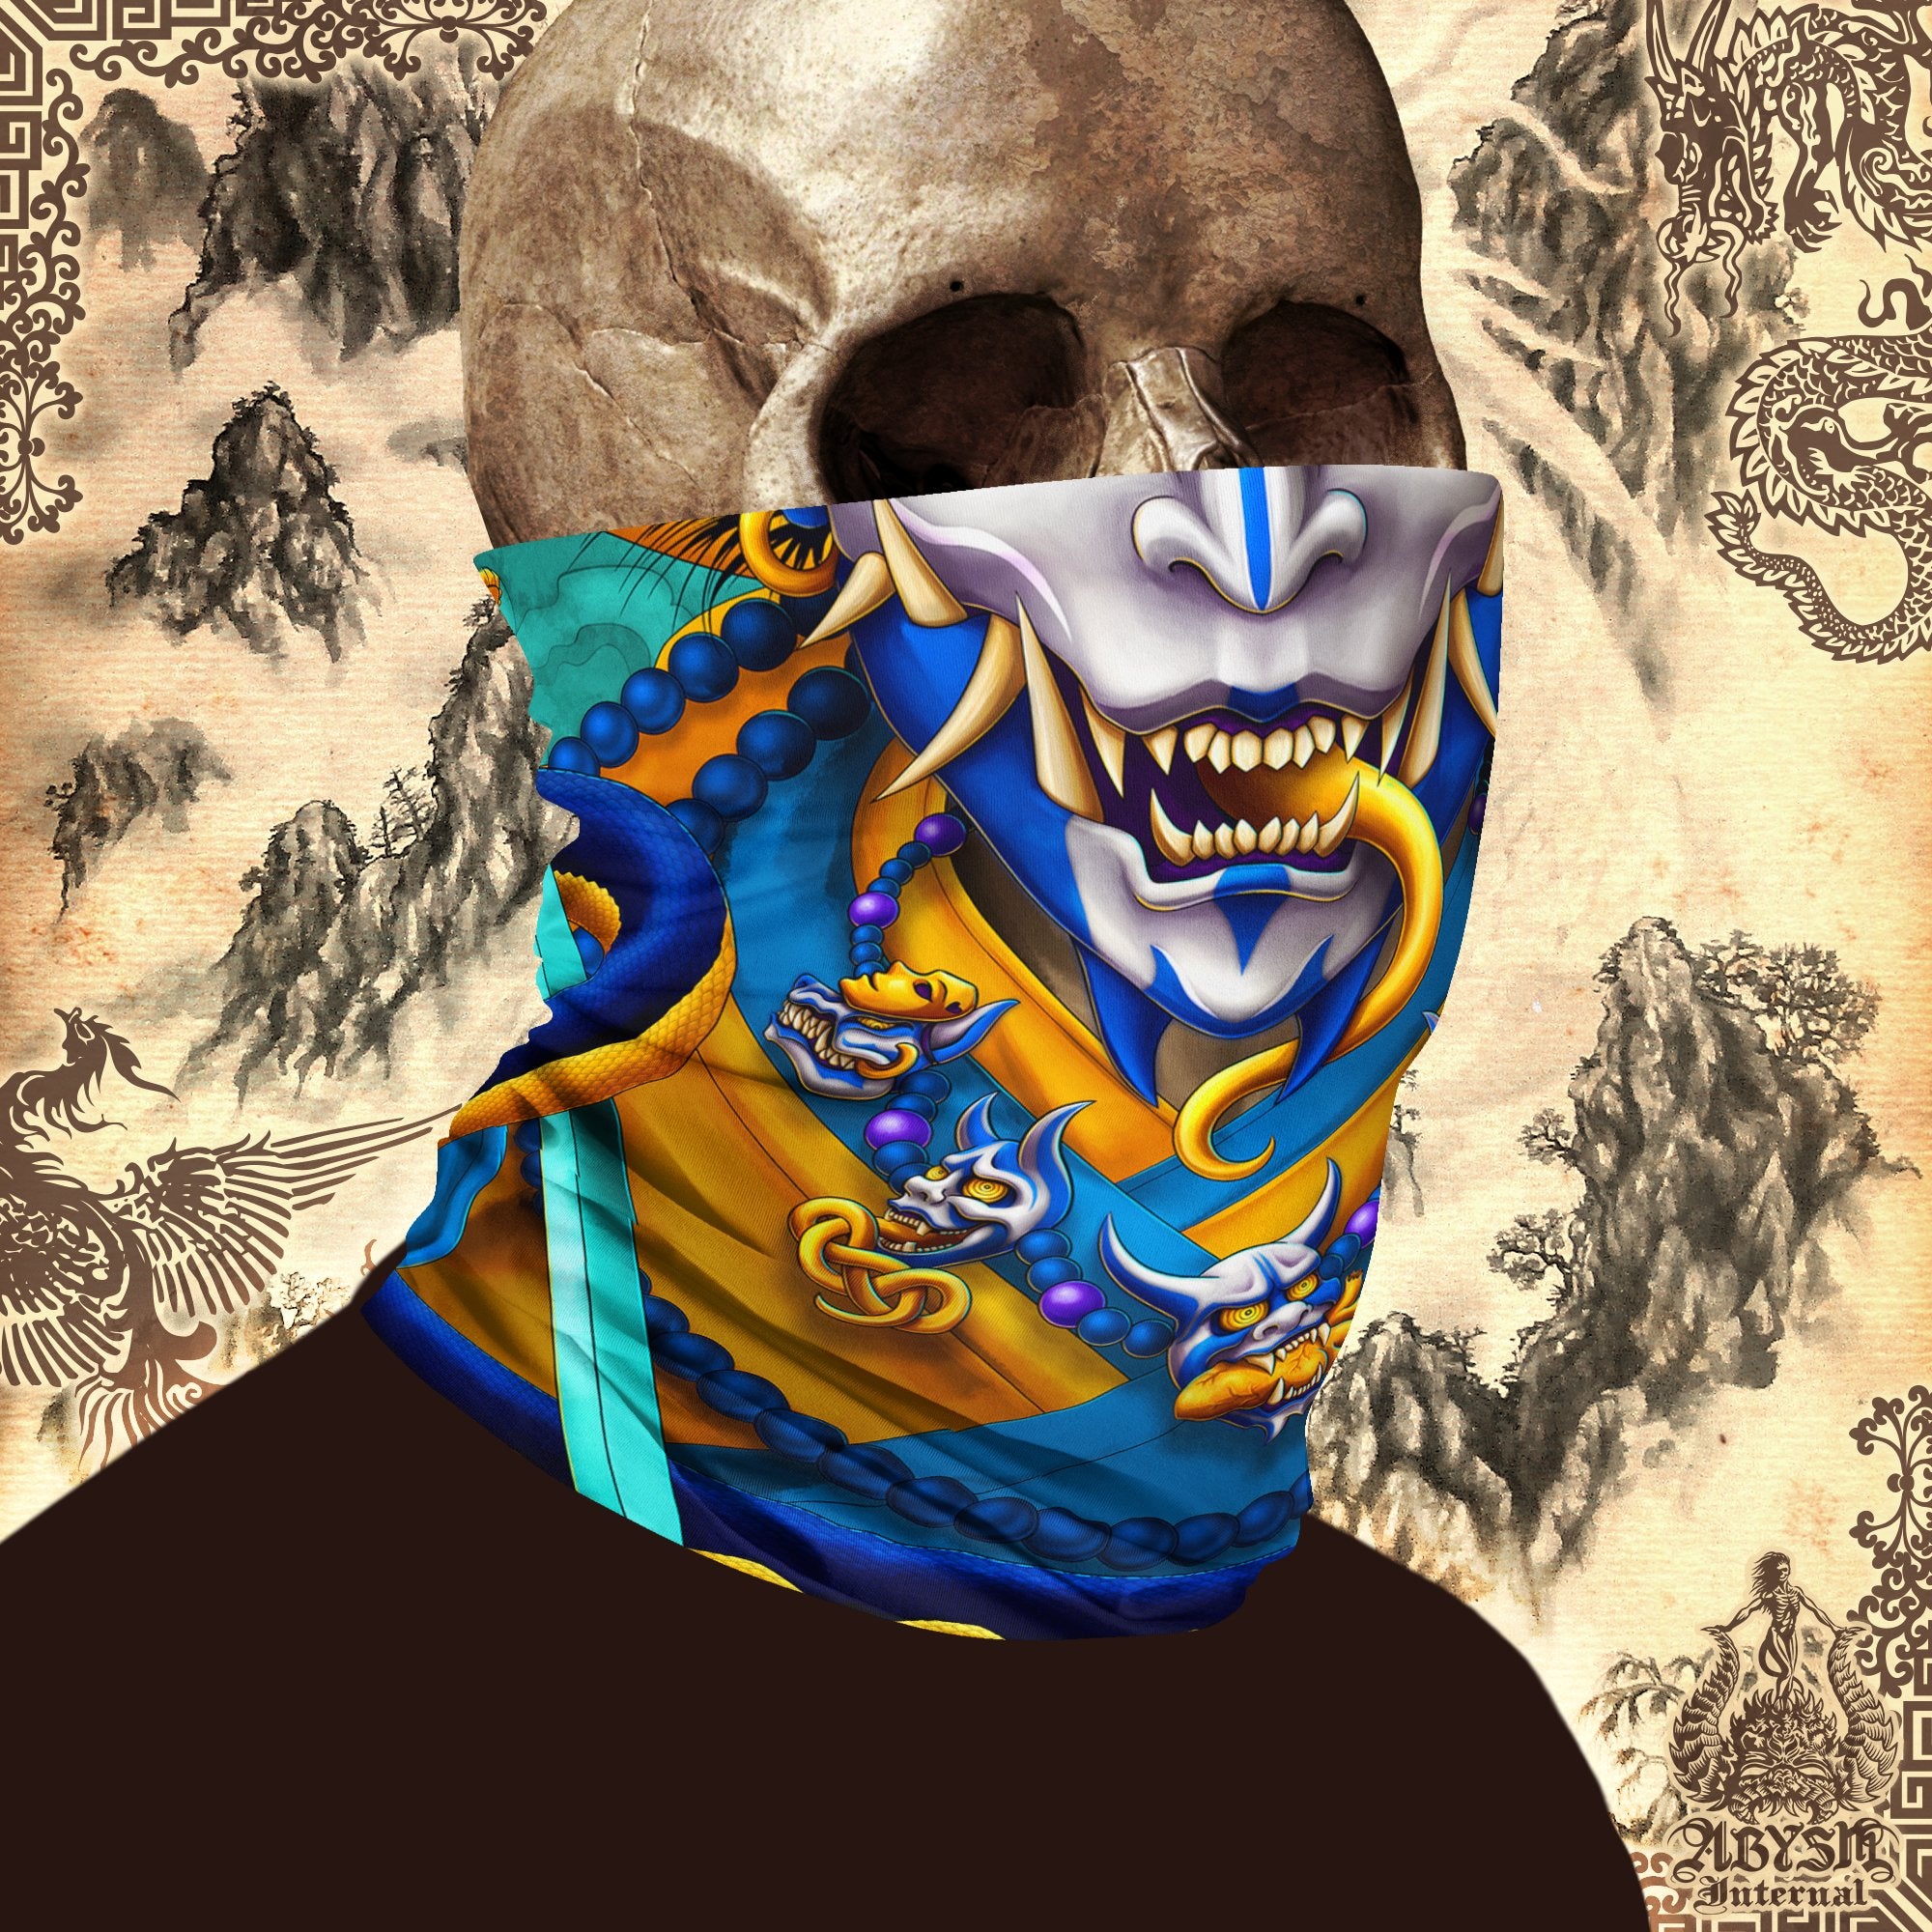 Demon Neck Gaiter, Oni Face Mask, Japanese Hannya Printed Head Covering, Cyclist Street Outfit, Snake, Fangs, Headband - Cyan Gold - Abysm Internal